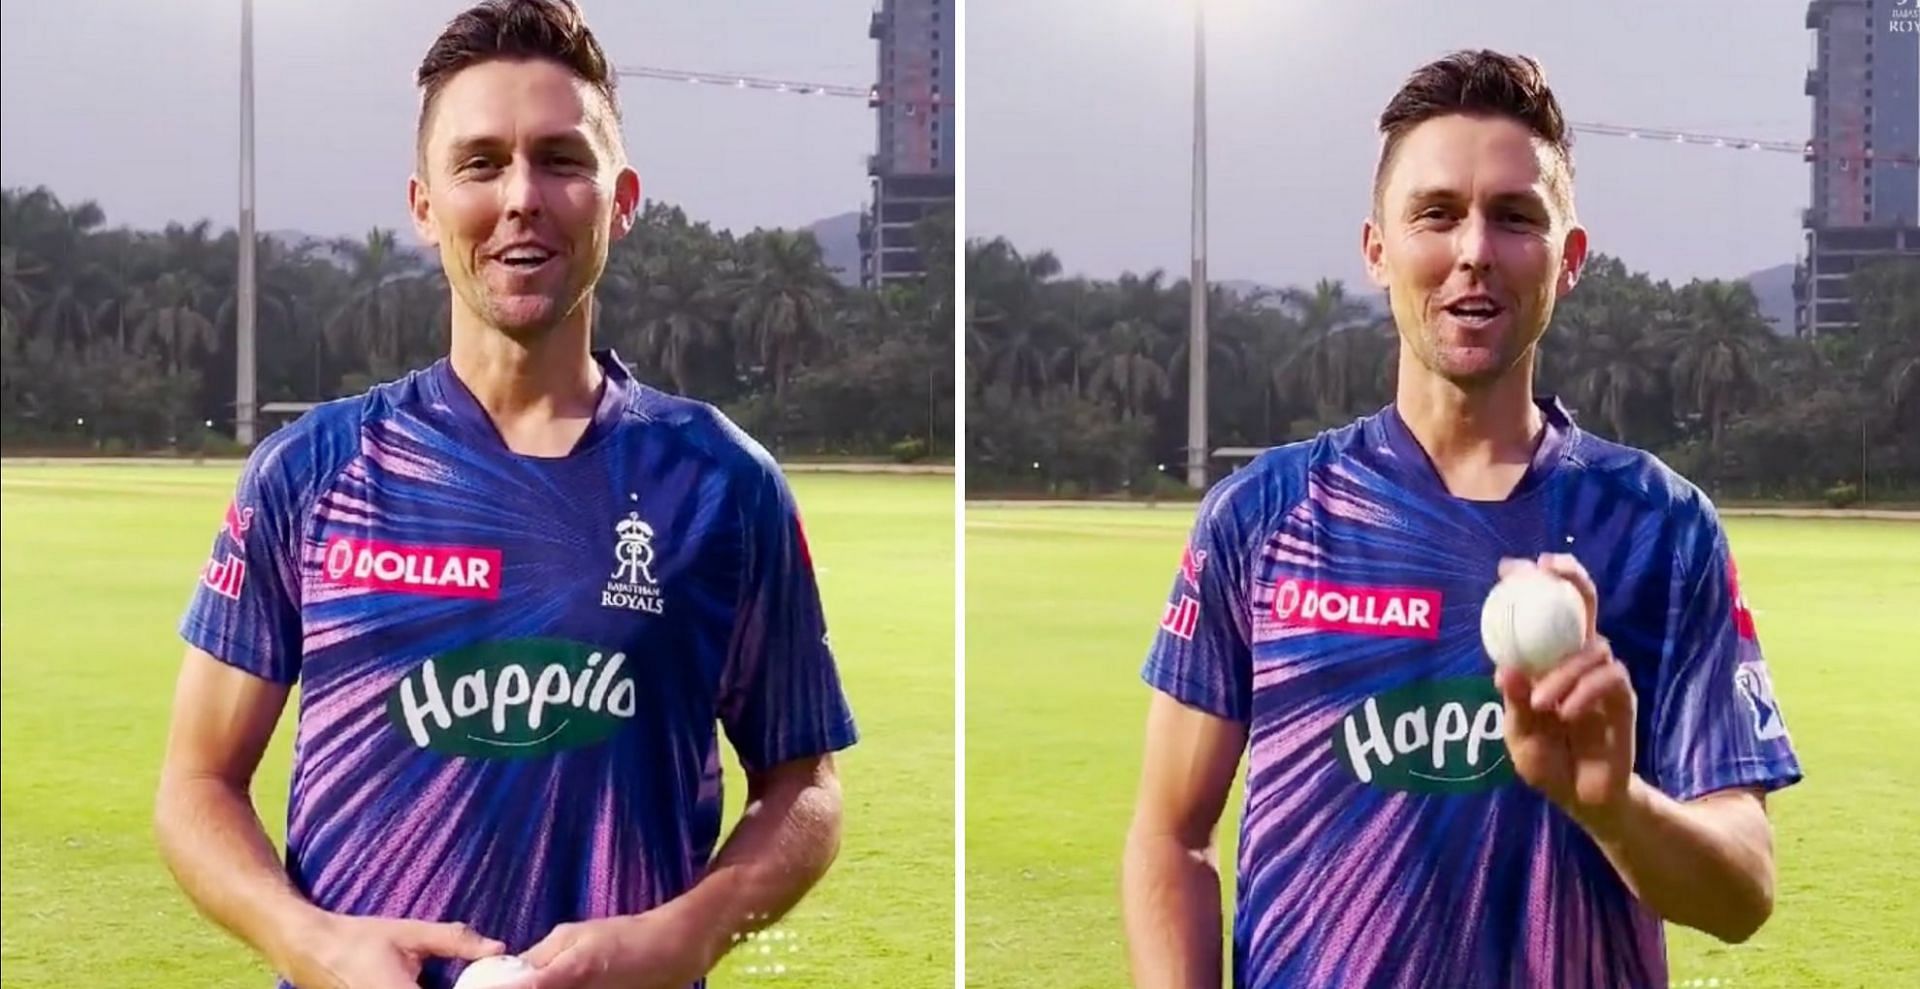 Watch] "Boult is here" - New Zealand pacer joins Rajasthan Royals training  ahead of IPL 2022